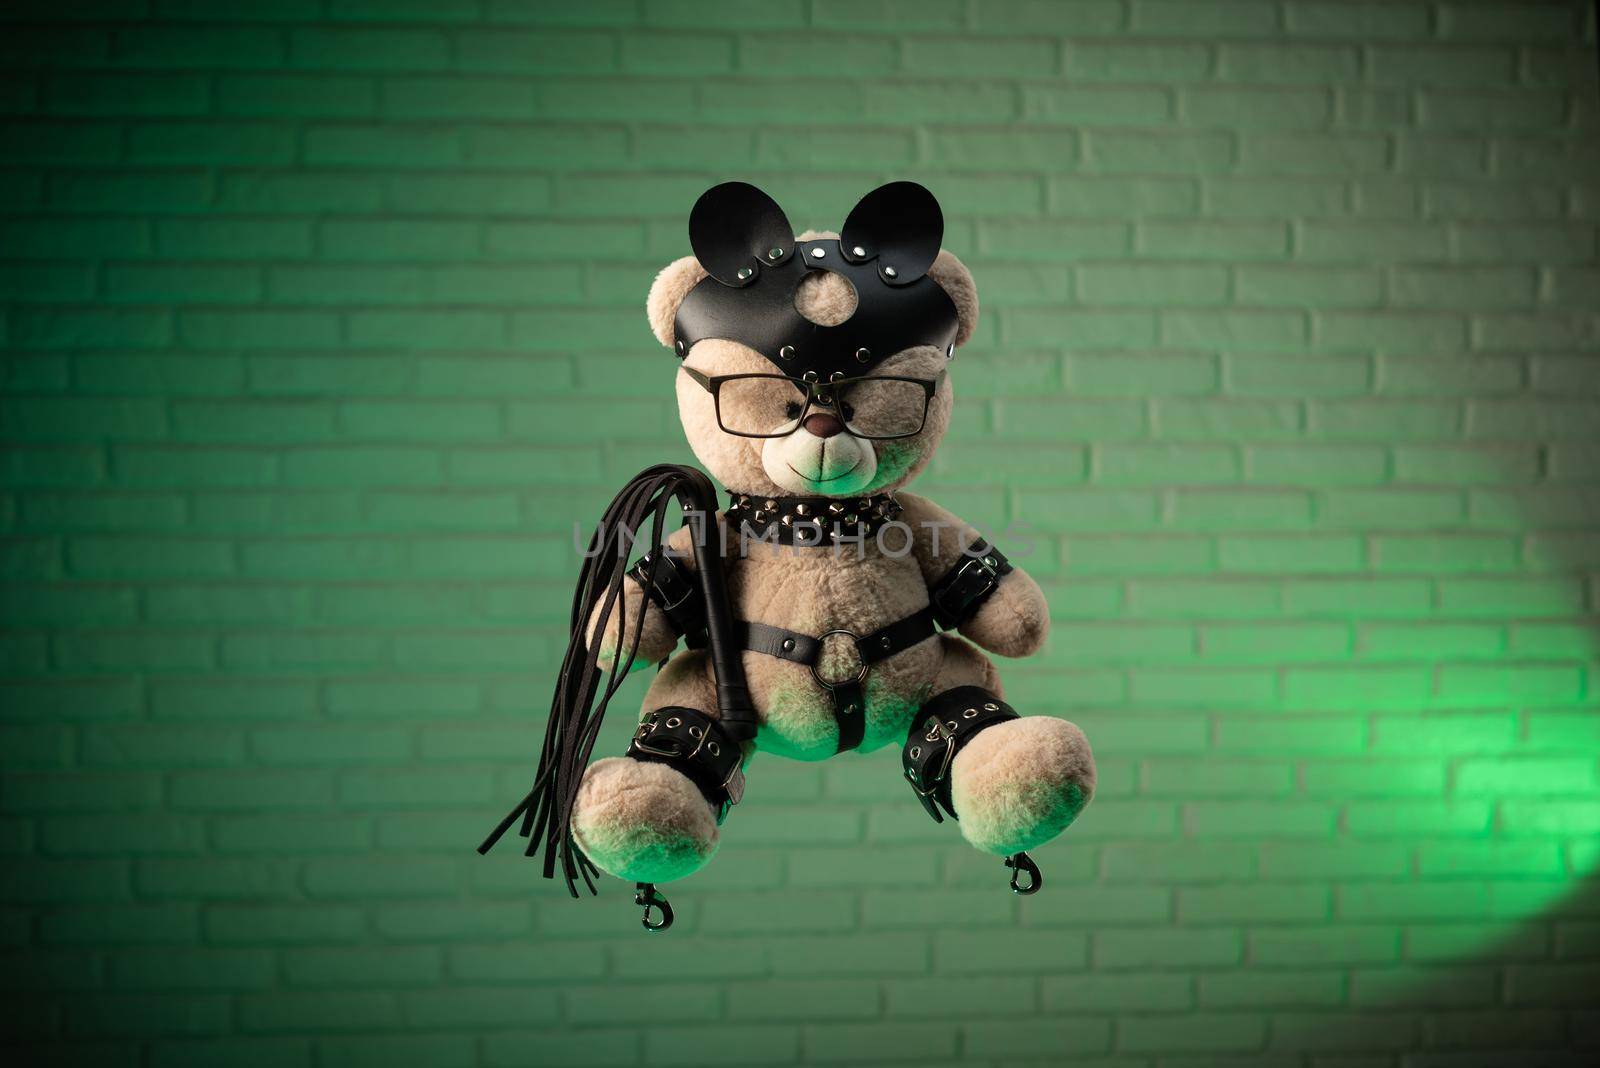 the toy Teddy bear dressed in leather belts and mask accessory for BDSM games on a light background texture of a brick wall